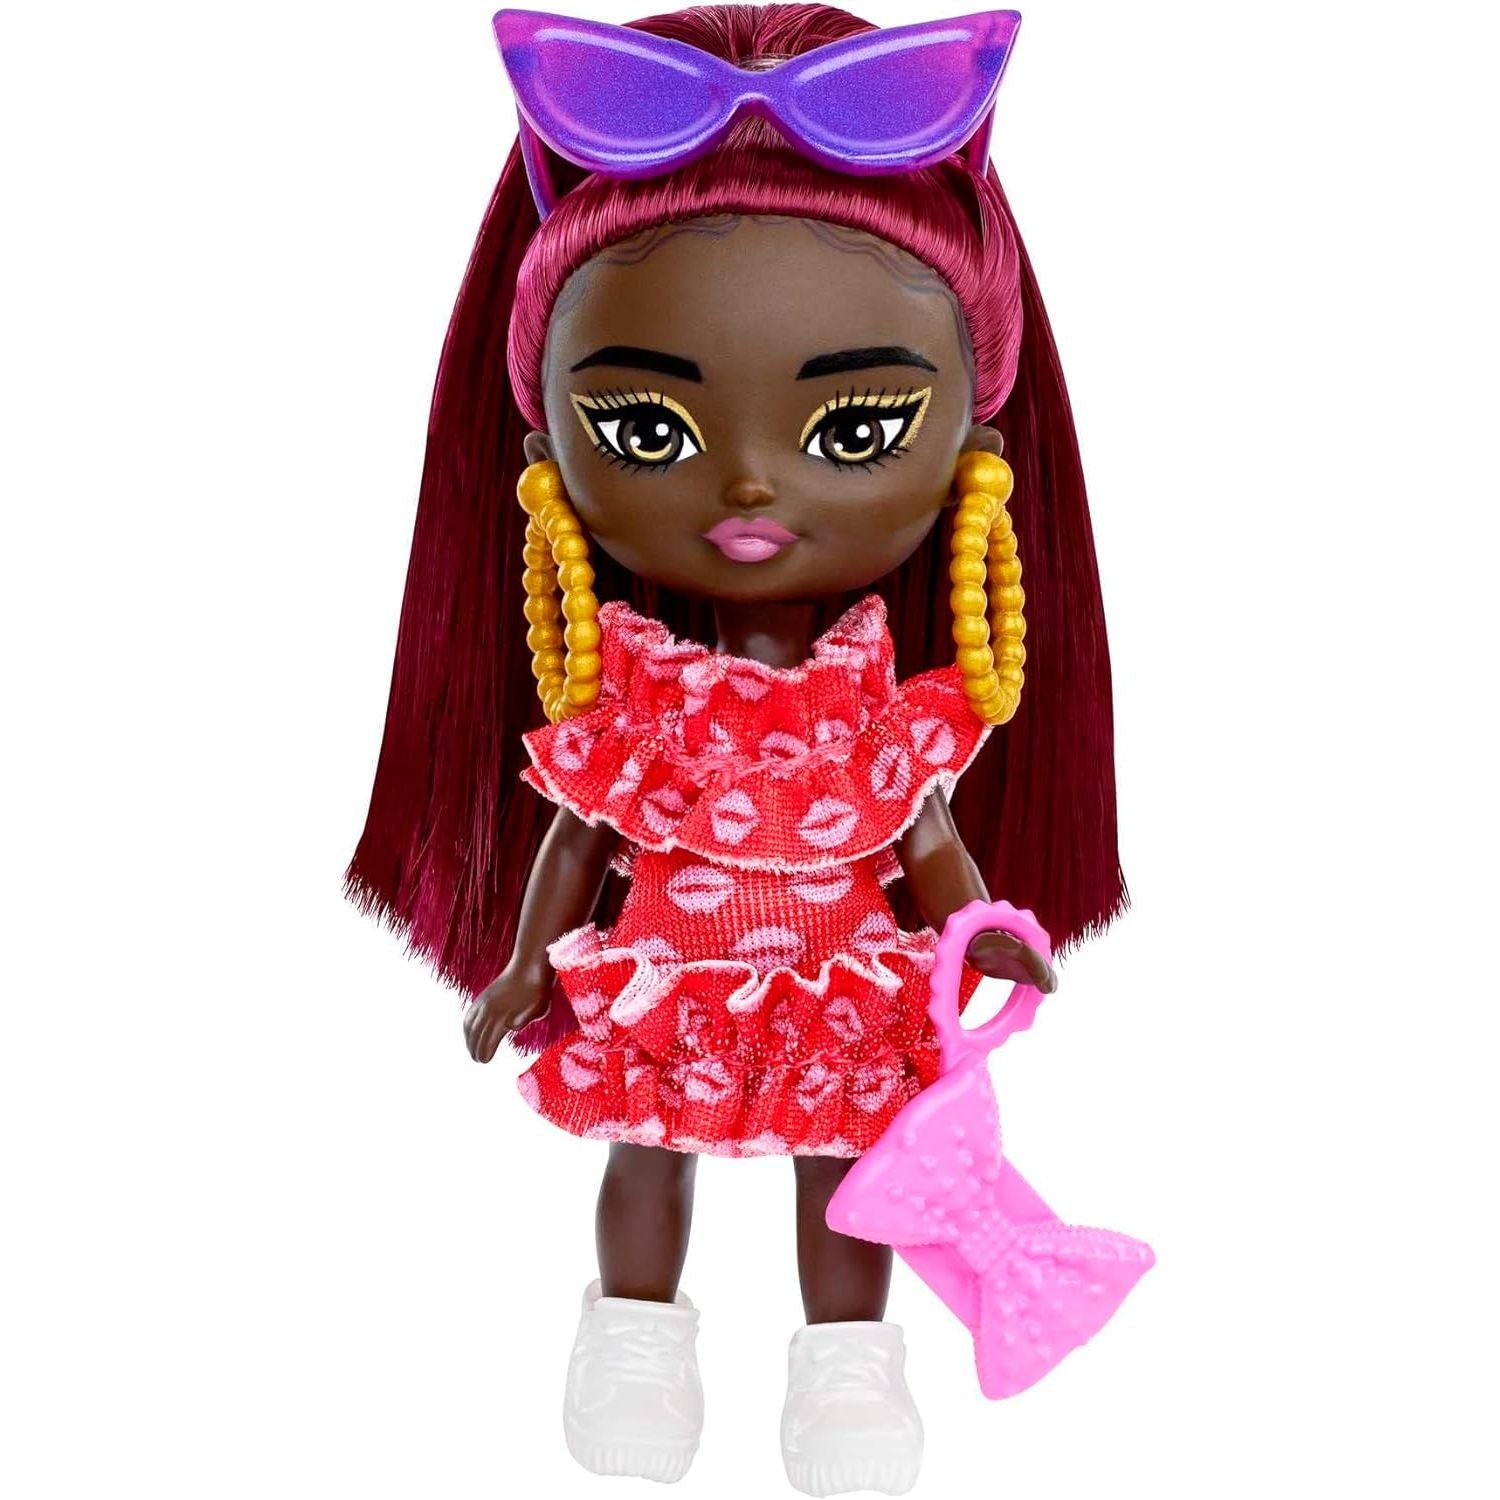 Barbie Extra Mini Minis Doll with Burgundy Hair, Red Ruffle Dress, Sunglasses & Accessories & Stand, 3.25-inch